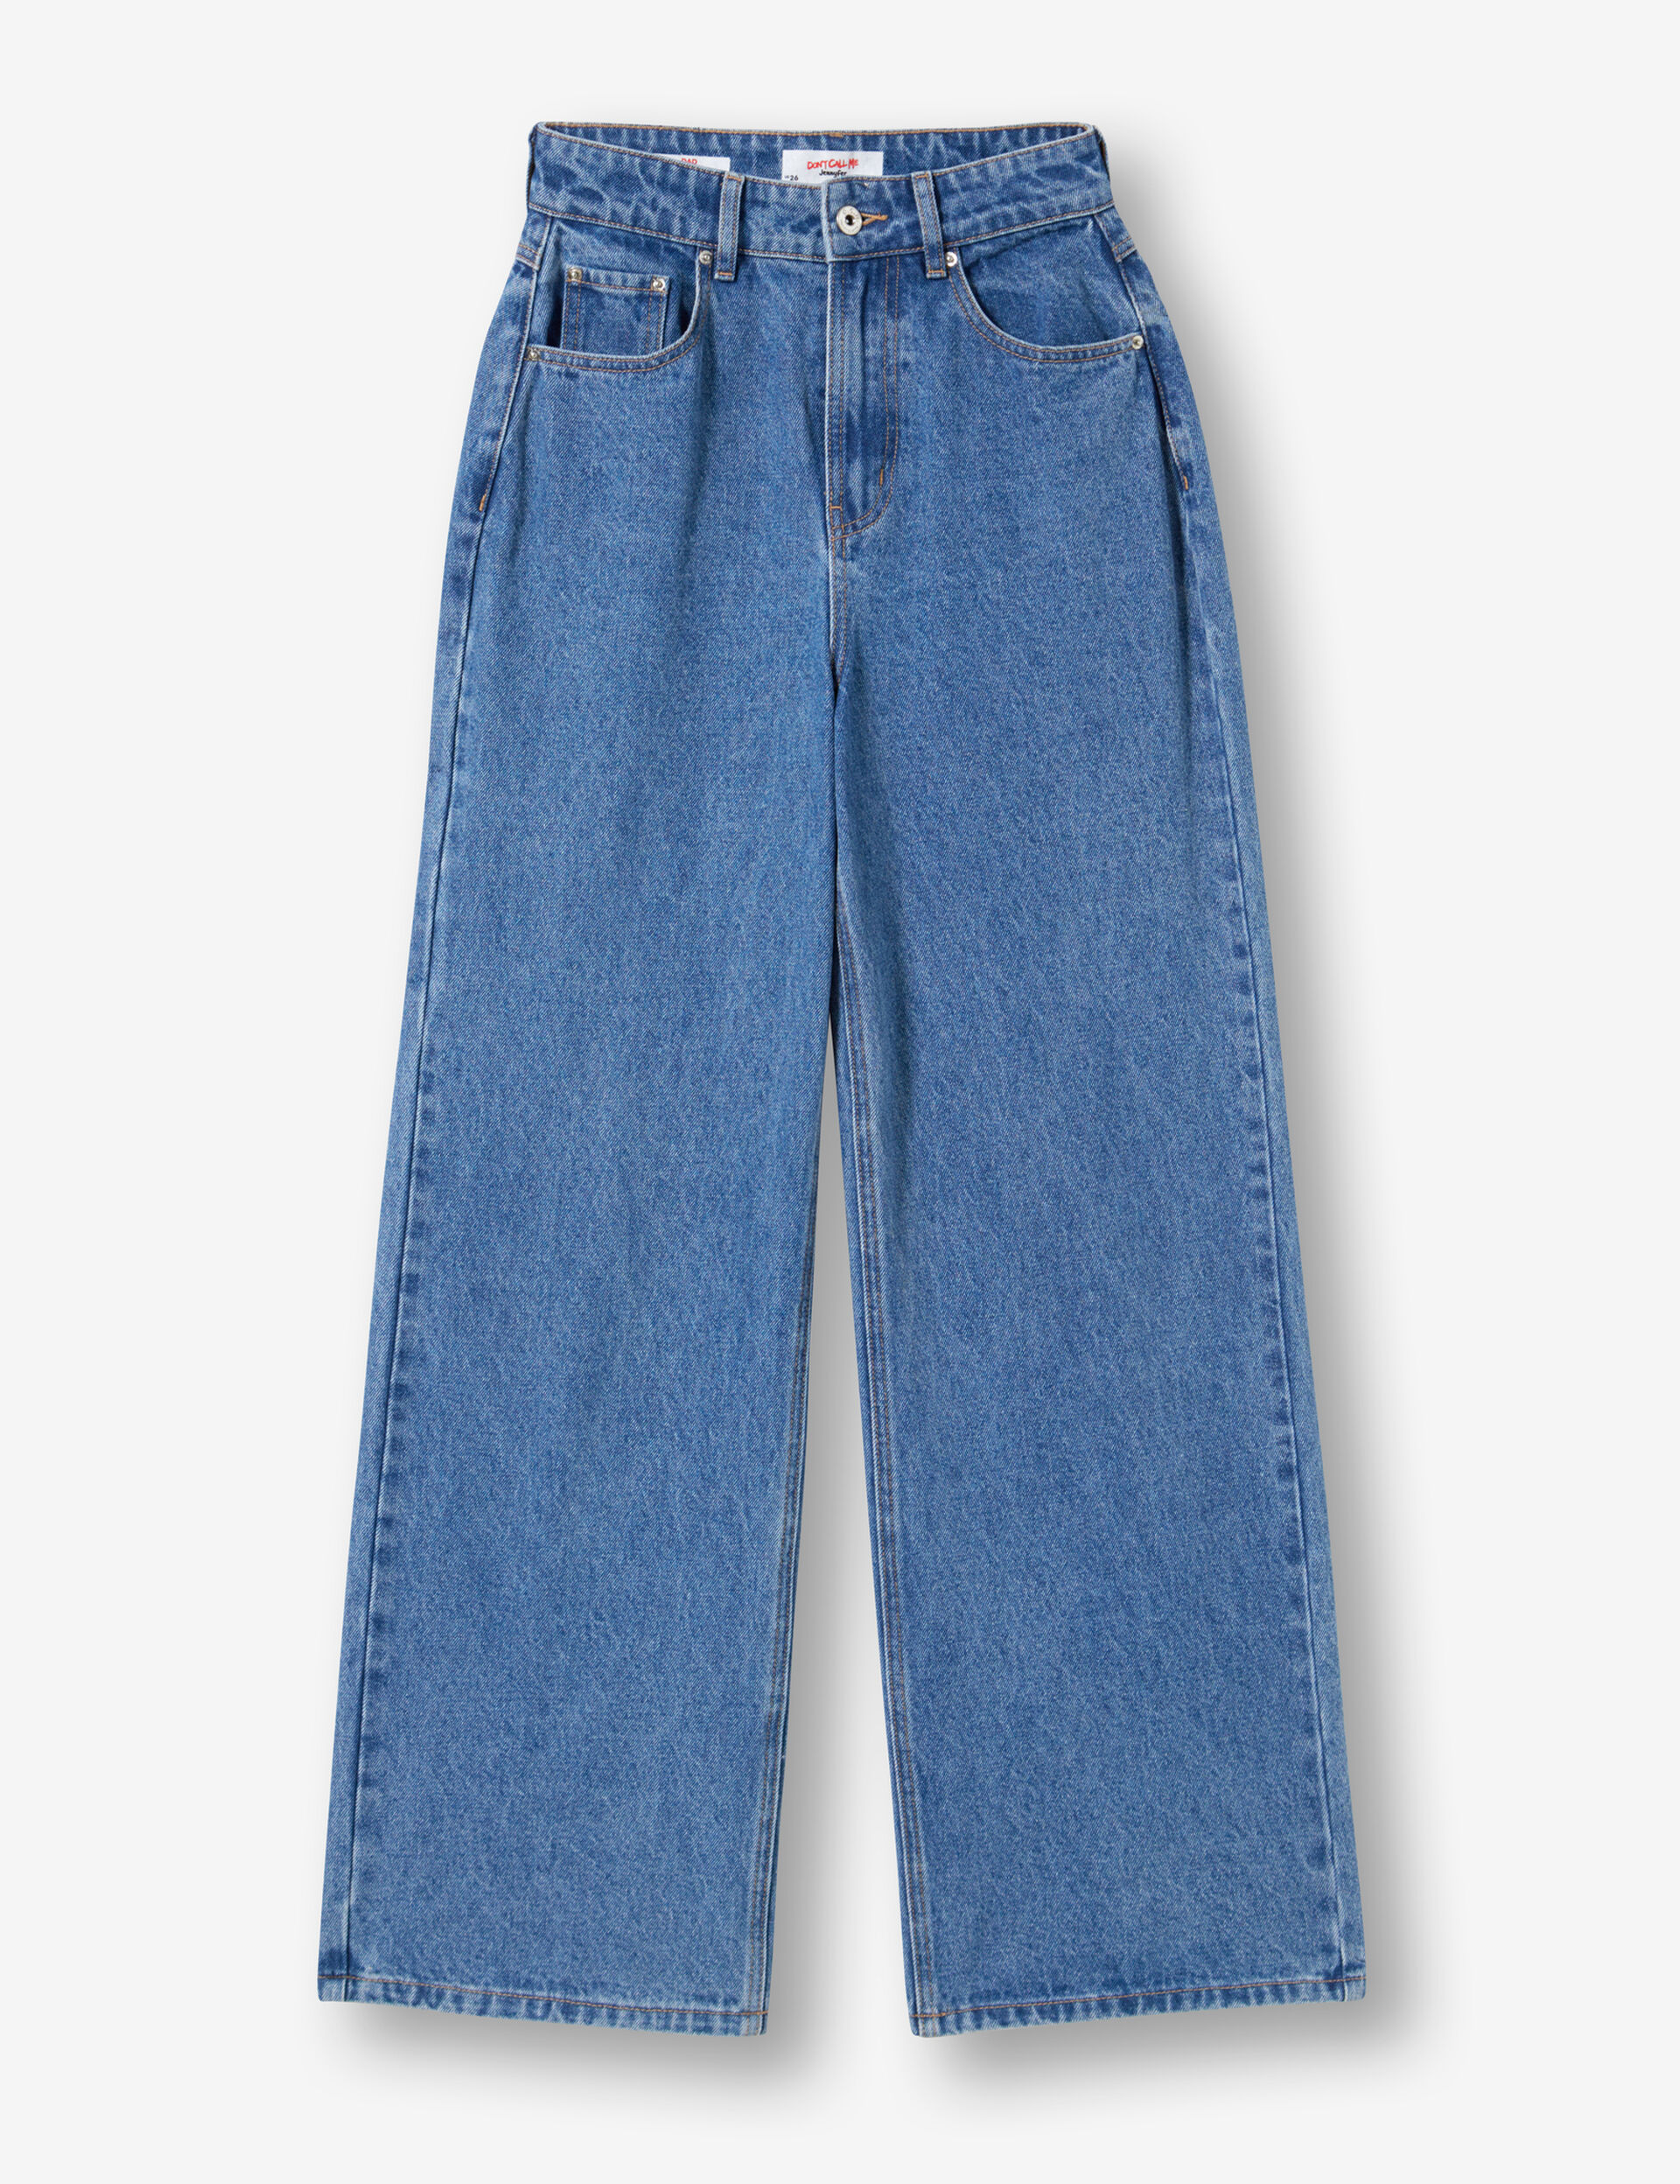 High-waisted dad jeans